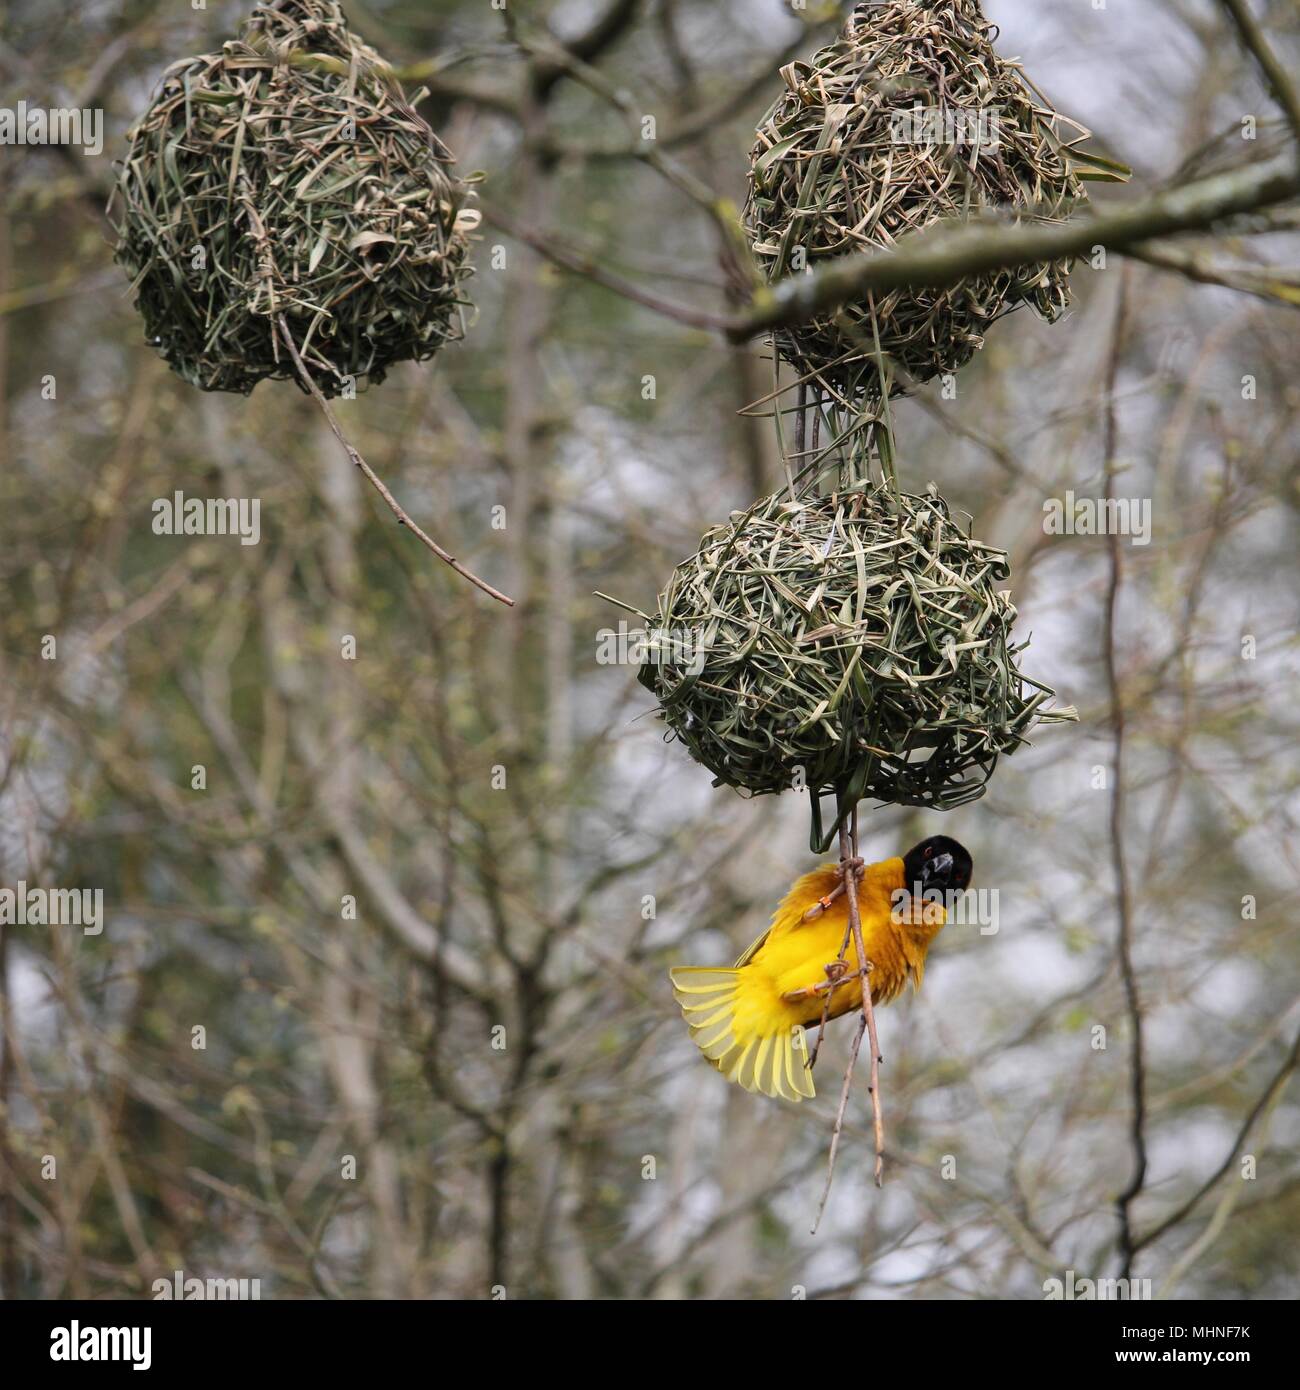 Male Village weaver (Ploceus cucullatus), also known as the spotted-backed weaver or black-headed weaver,building its distinctive woven nest Stock Photo